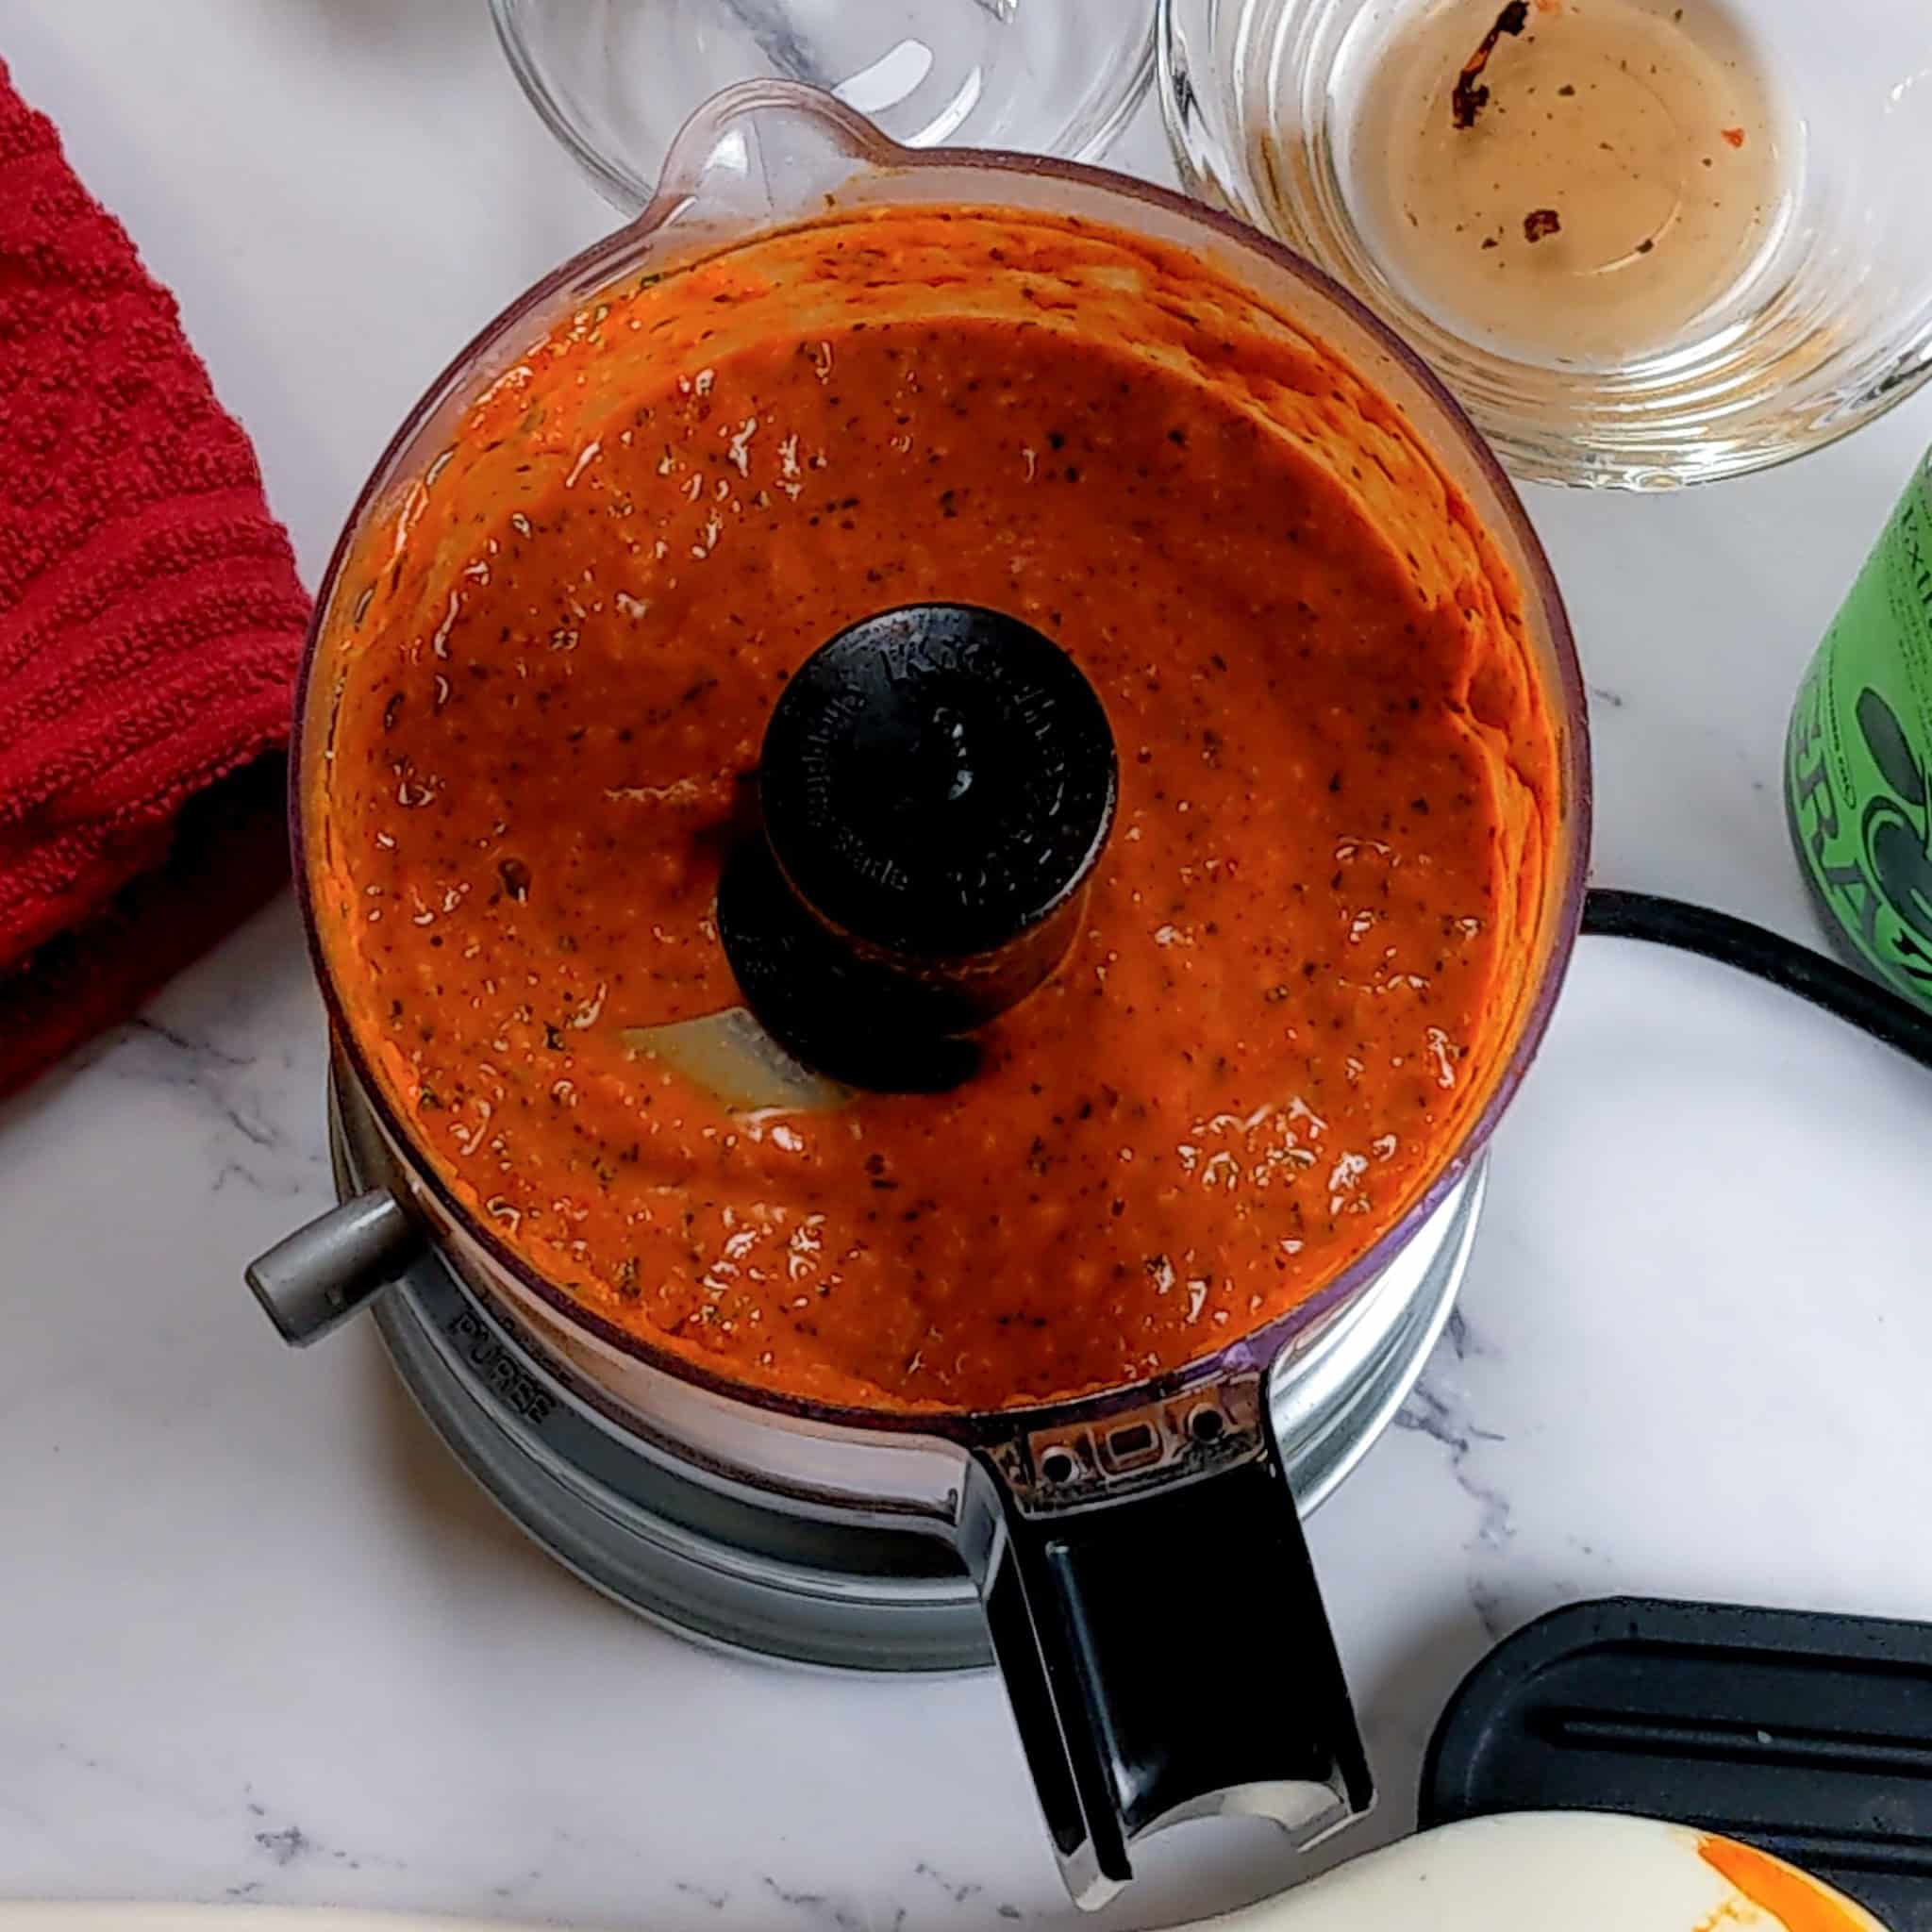 the finished spicy quick basil romesco sauce in the kitchenaid chopper.